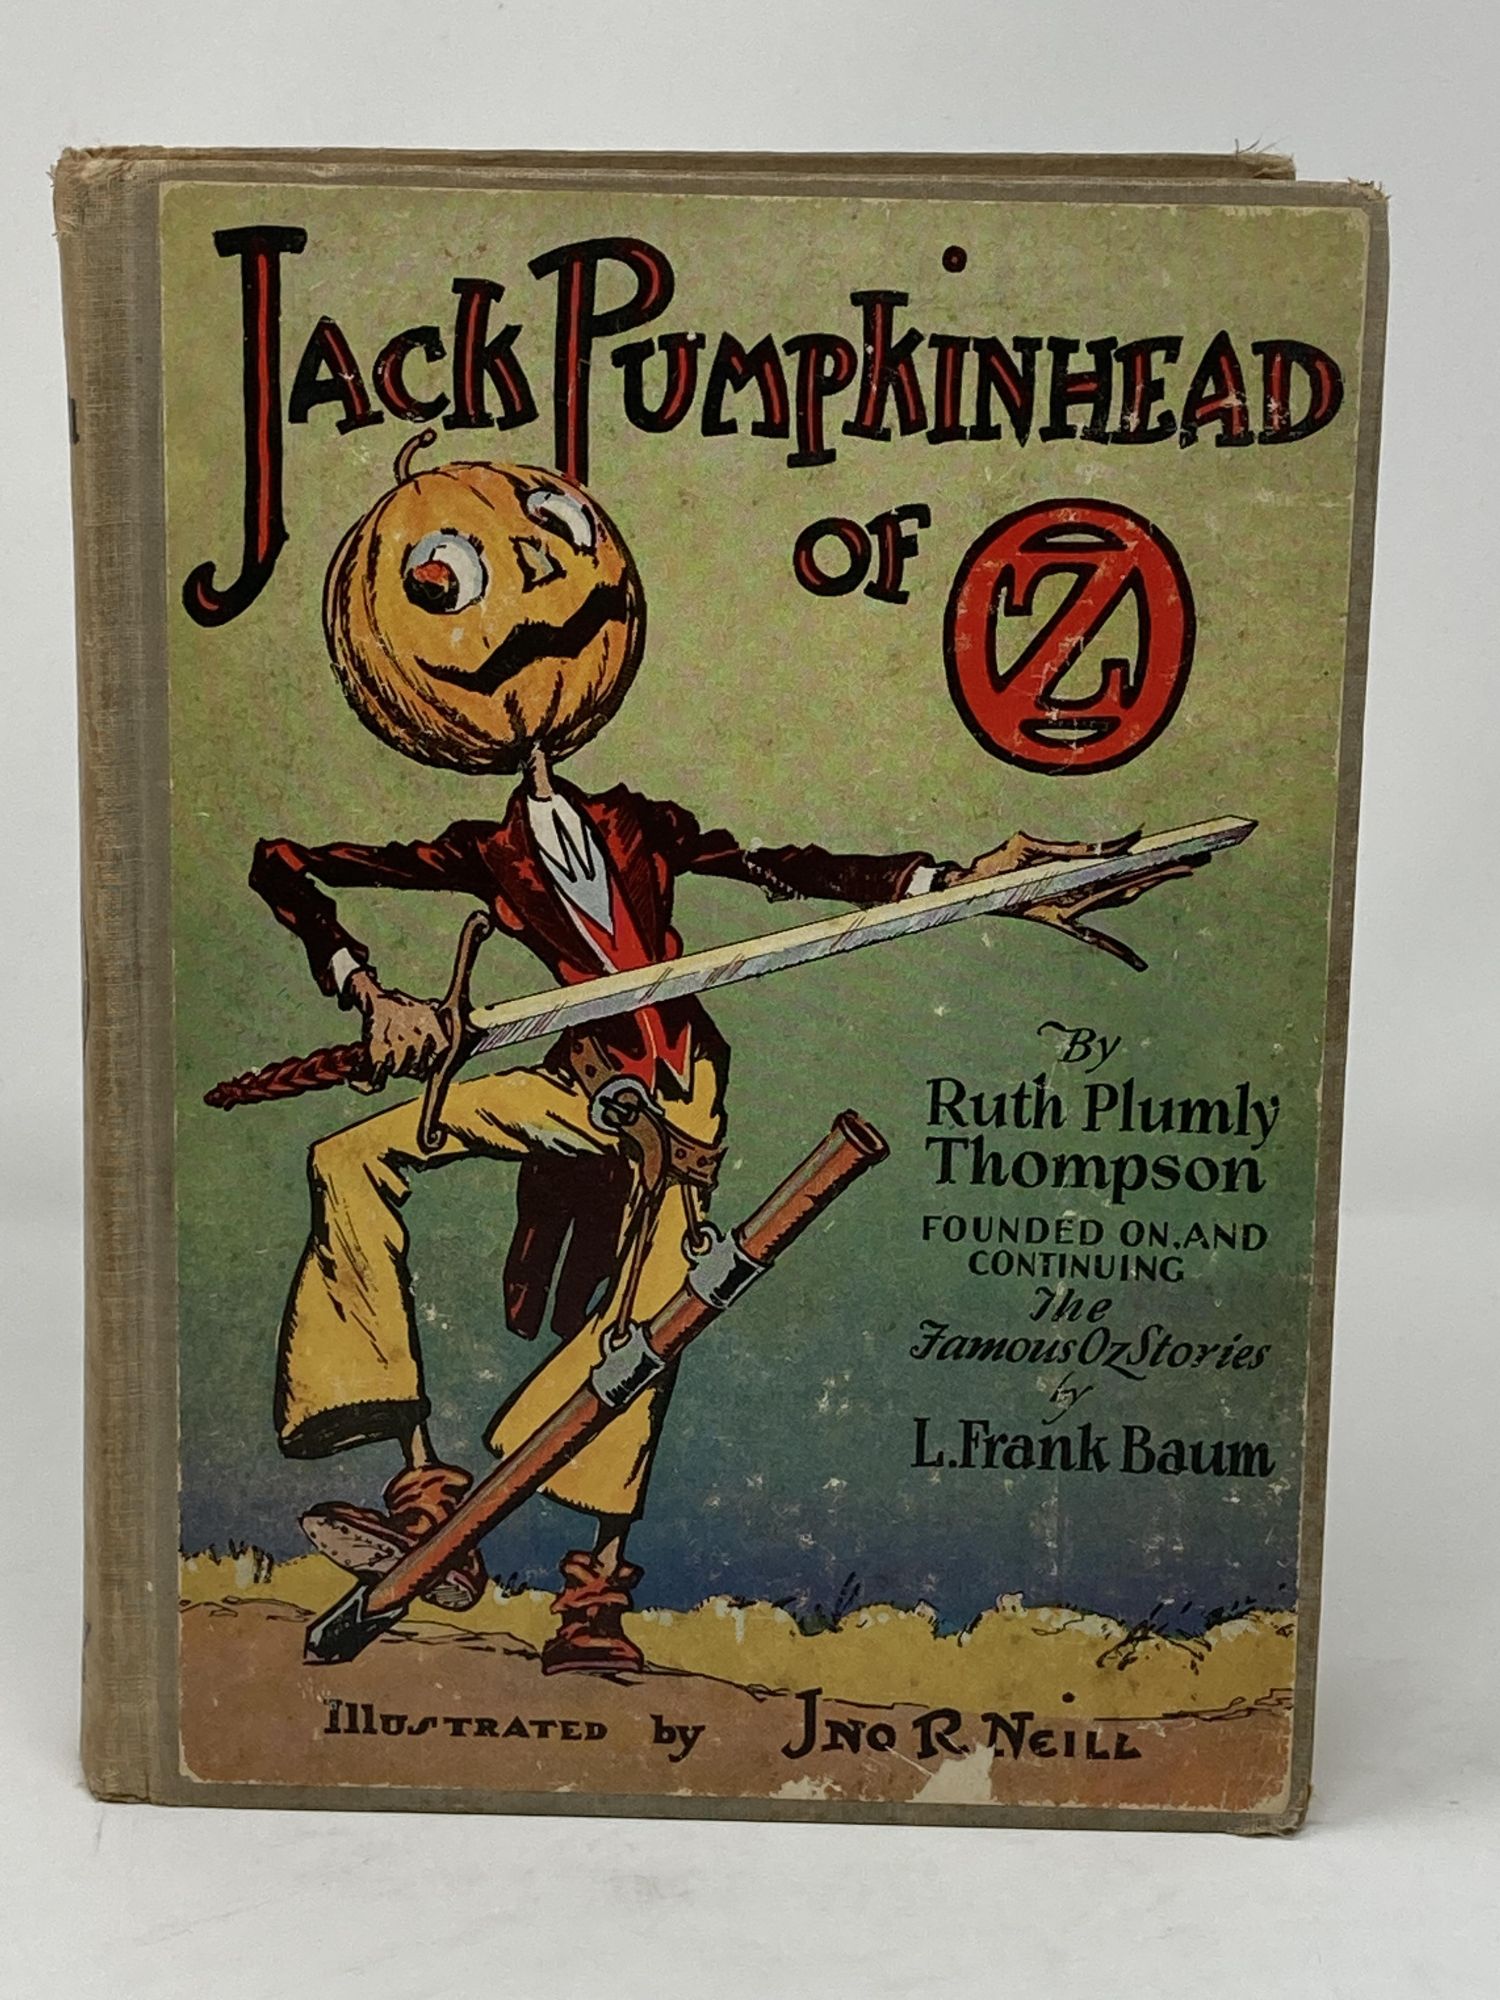 Thompson, Ruth Plumly. [L. Frank Baum] - Jack Pumpkinhead of Oz; by Ruth Plumly Thompson, Founded on and Continuing the Famous Oz Stories by L. Frank Baum